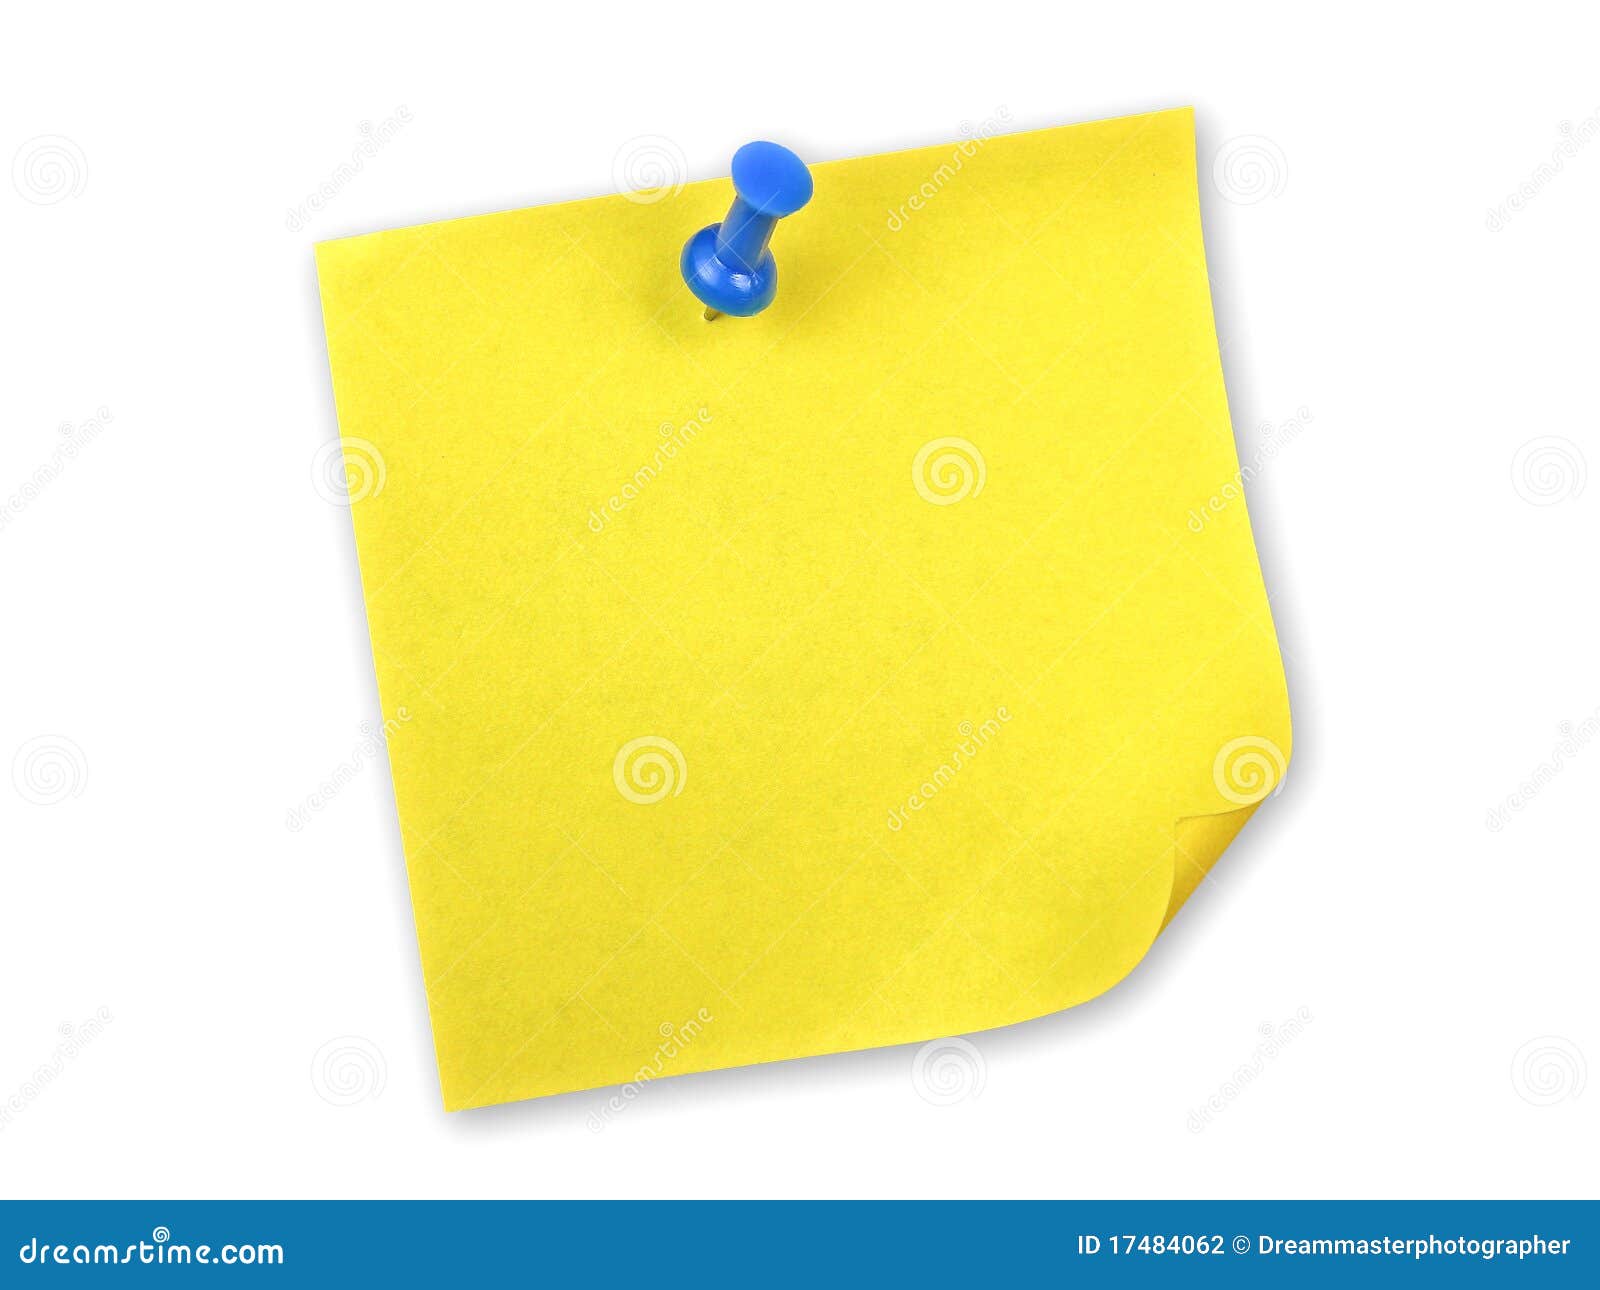 yellow note with pin